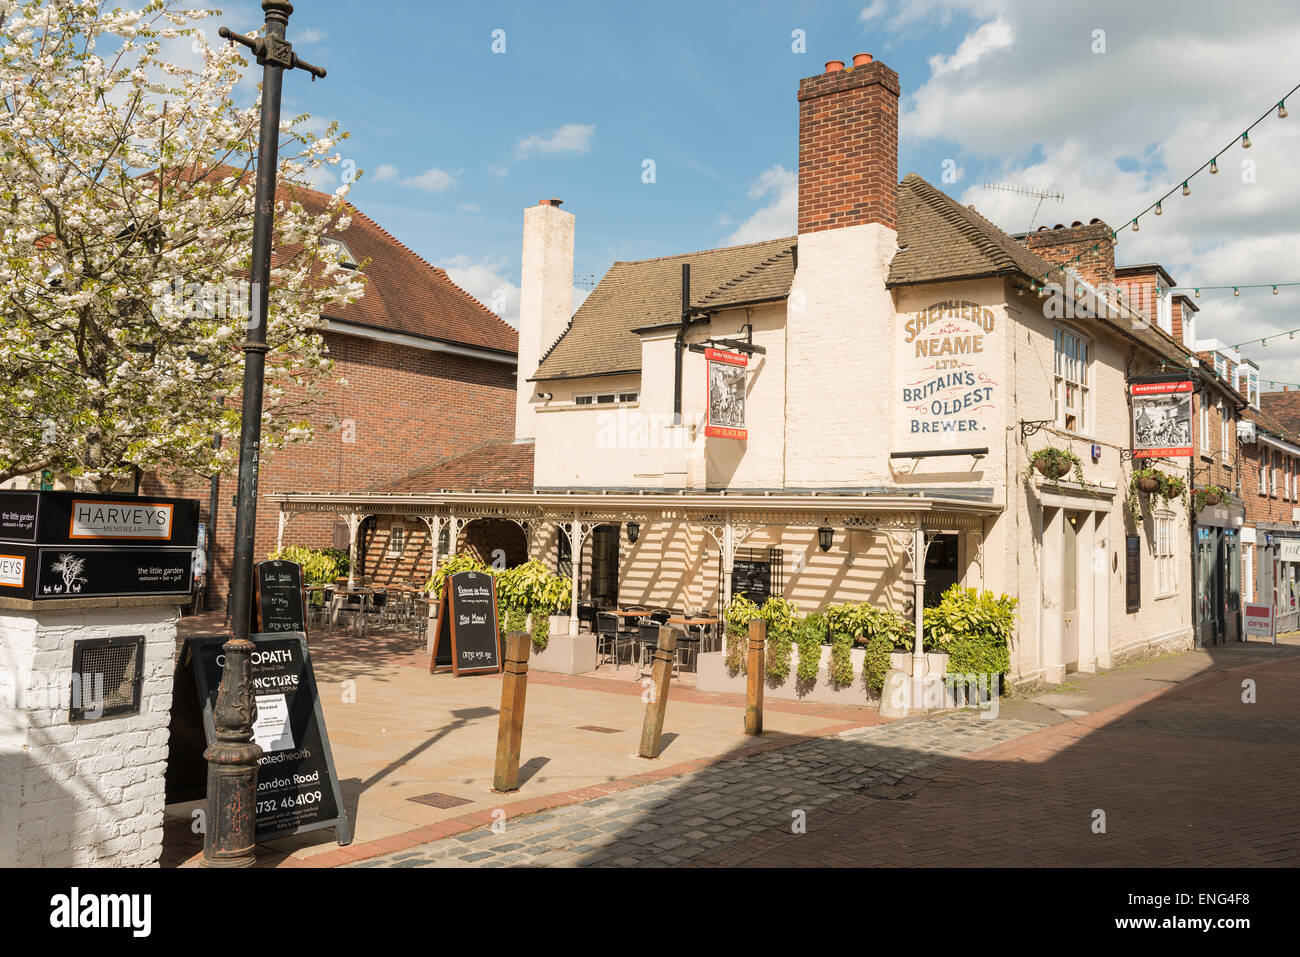 Heart of old historic Sevenoaks town showing Black Boy Pub a local traditional brew Shepherd Neame Britians oldest Brewer Stock Photo